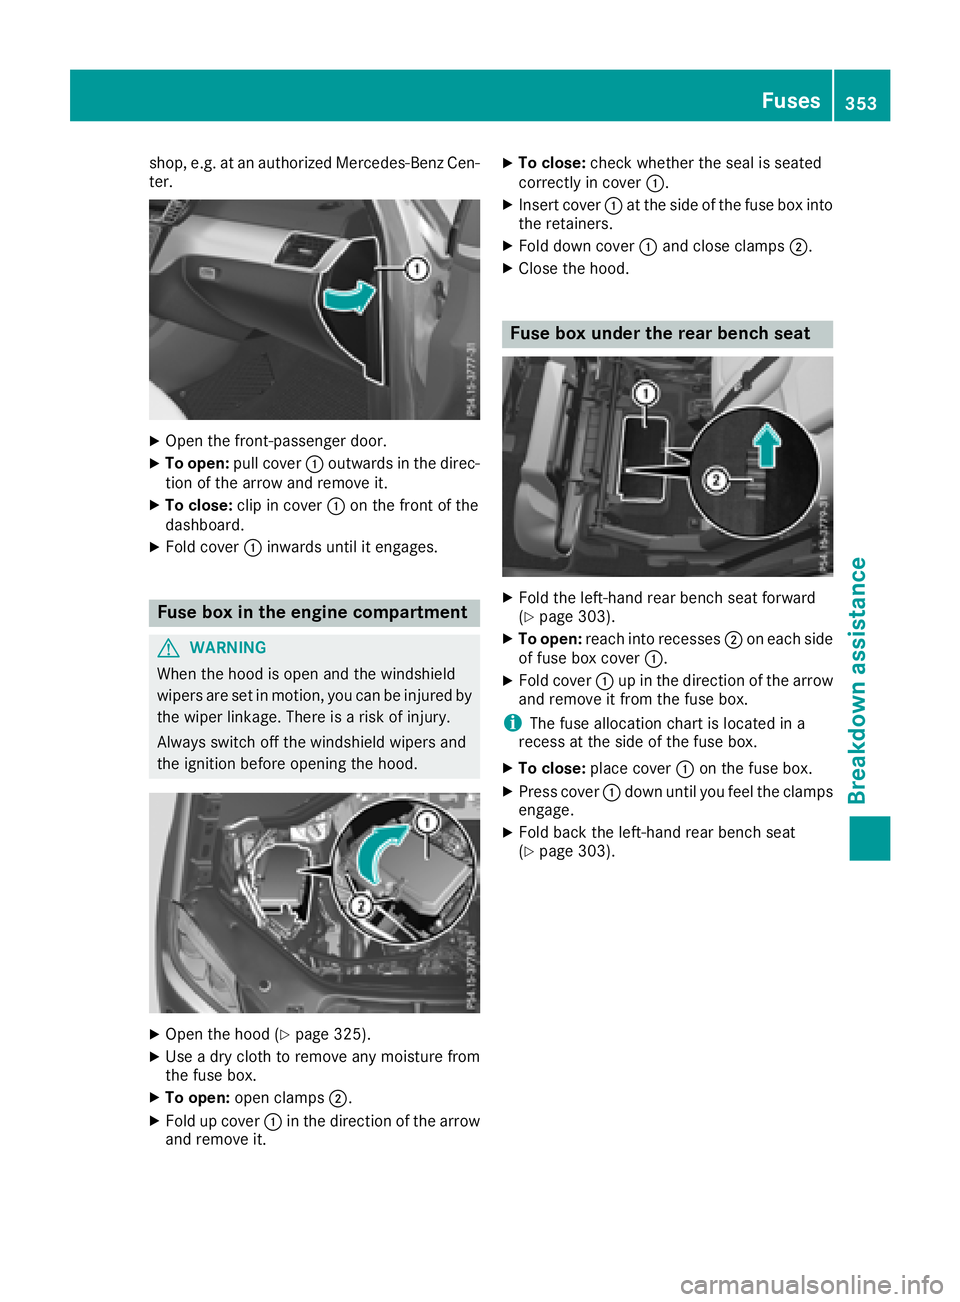 MERCEDES-BENZ GLS 2018  Owners Manual shop, e.g. at an authorized Mercedes-Benz Cen-
ter.
X
Open the front-passenger door. X
To open: pull cover �C outwards in the direc-
tion of the arrow and remove it. X
To close: clip in cover �C on th